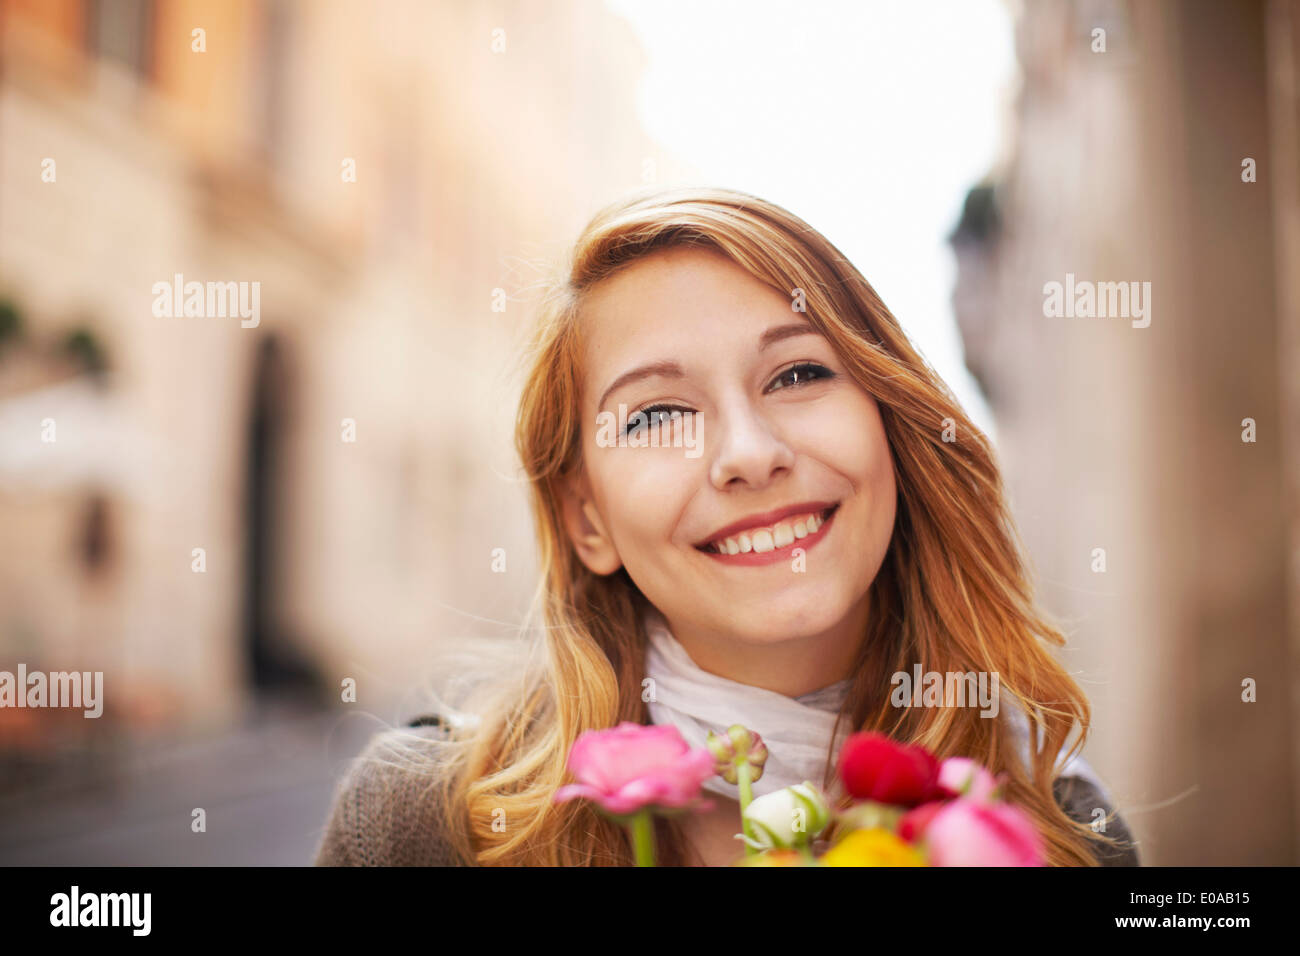 Smiling young woman with a bunch of flowers Stock Photo